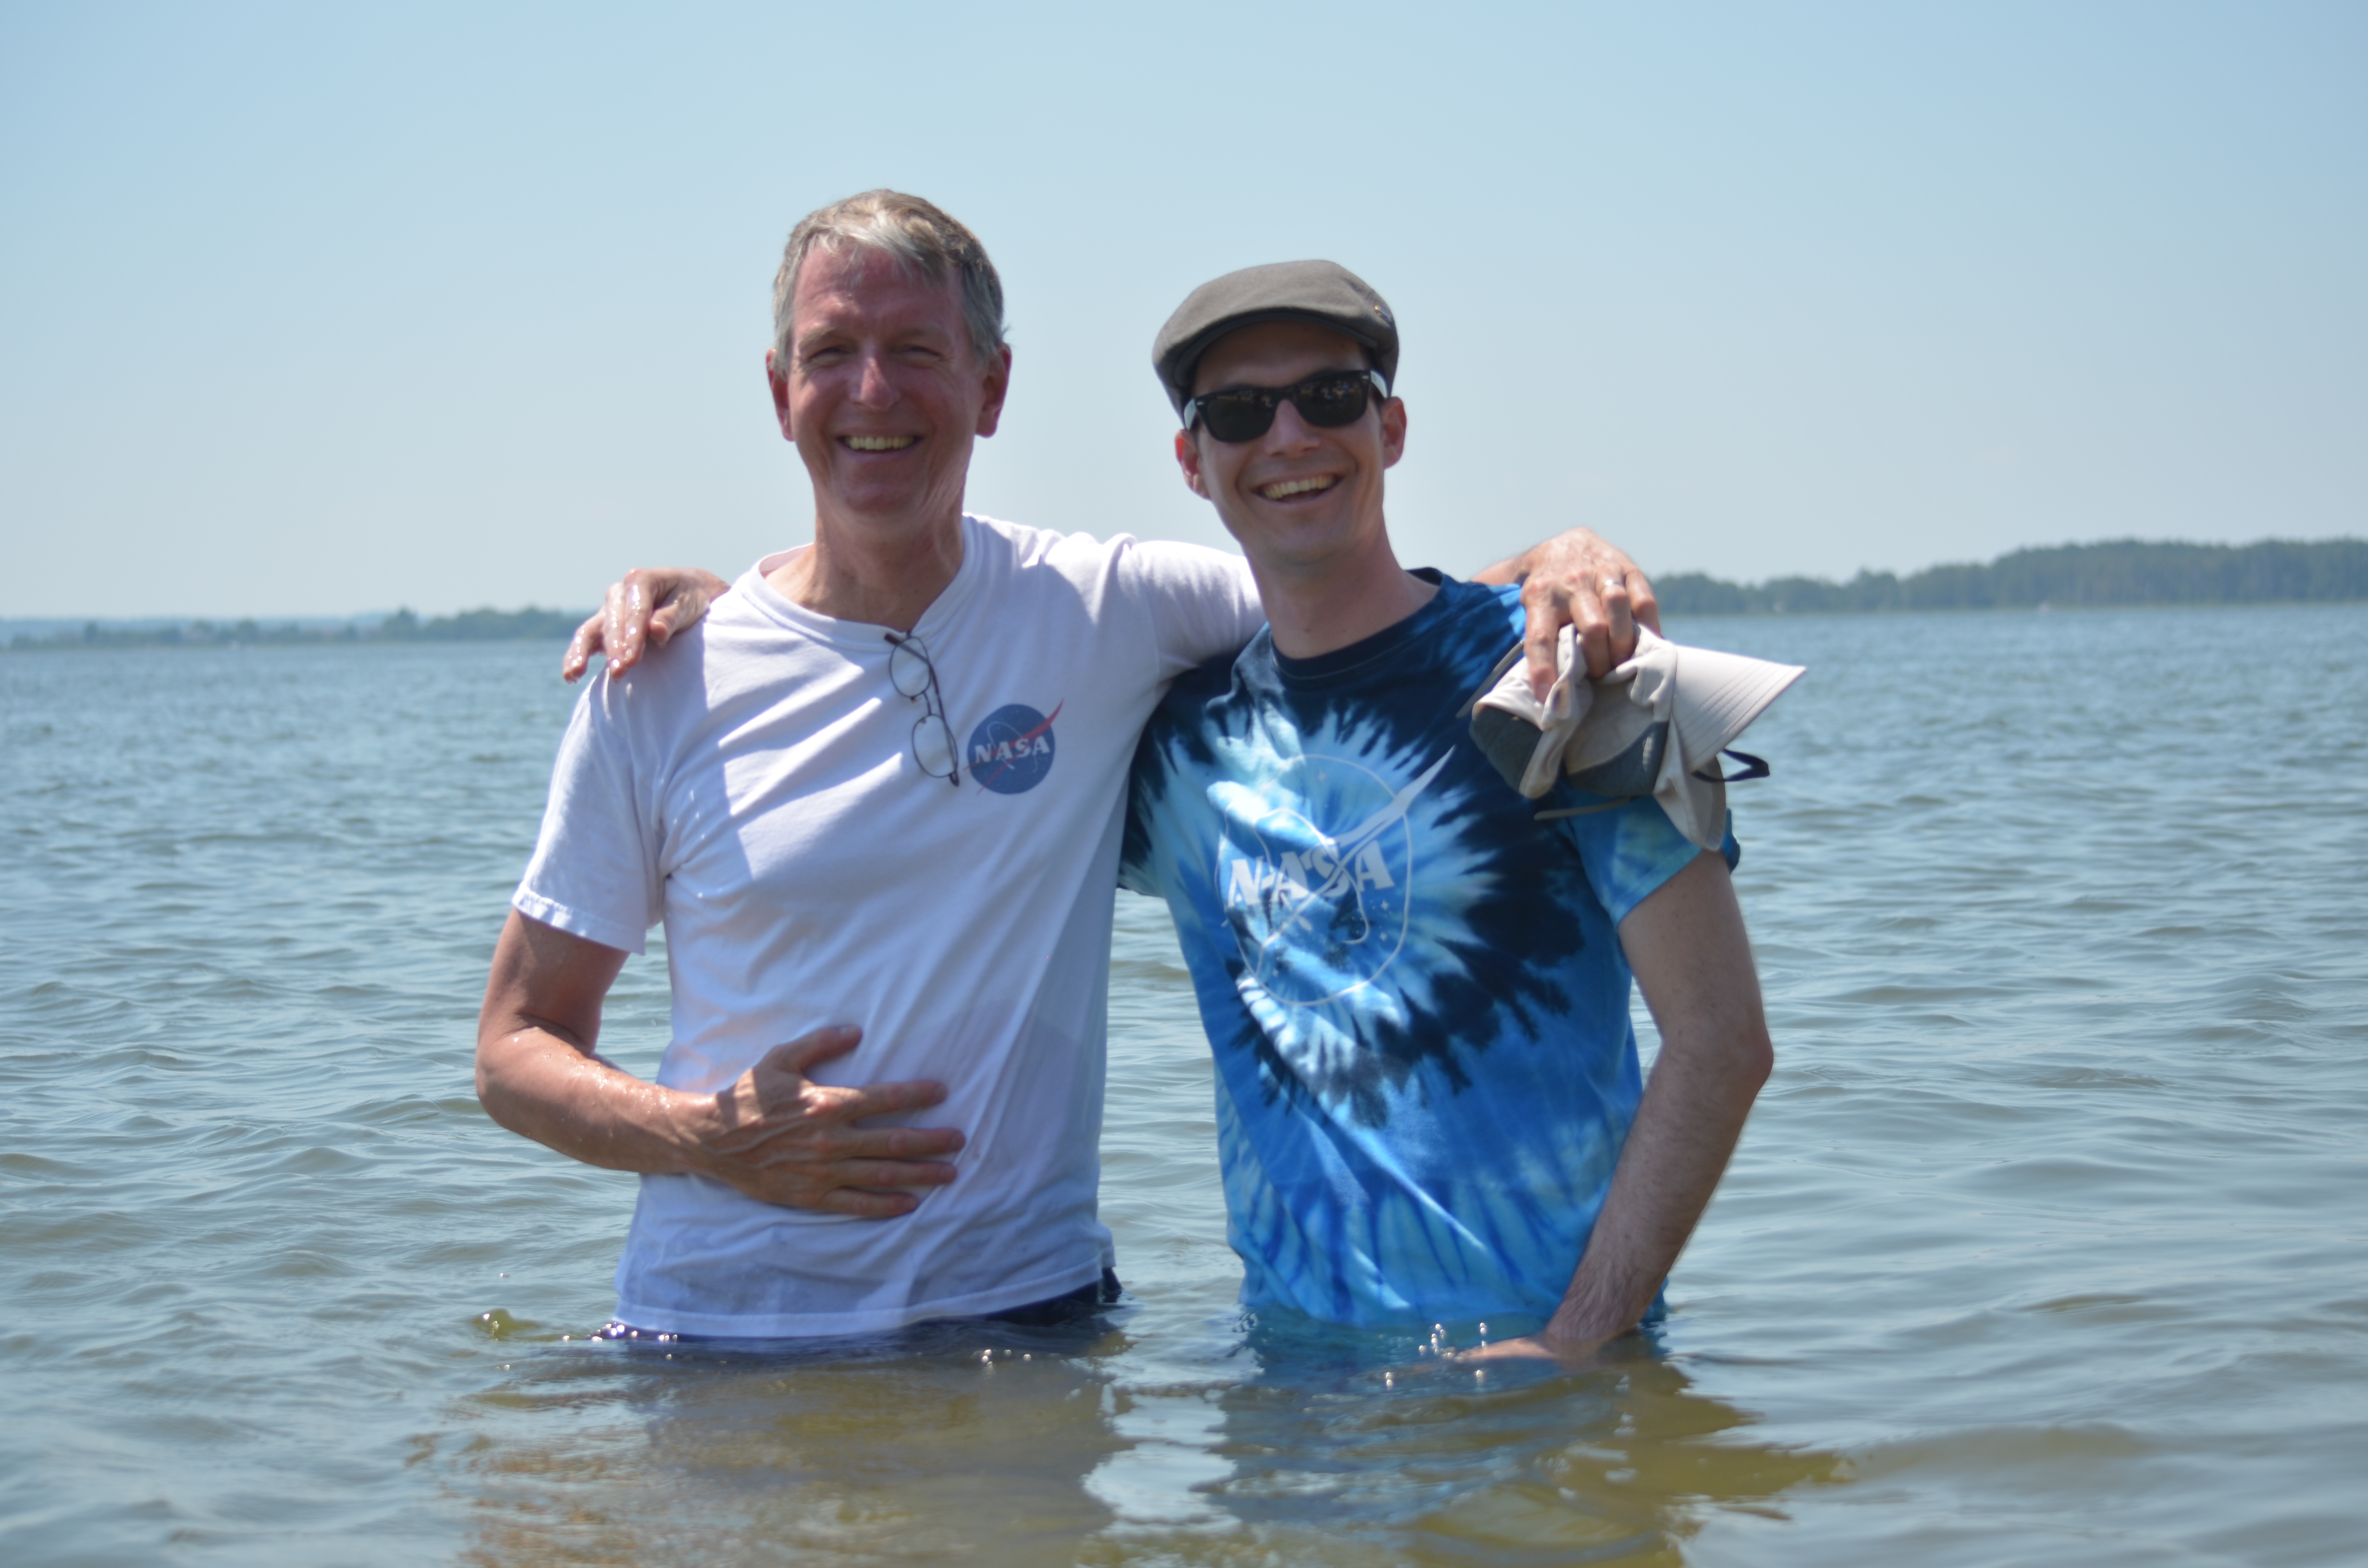 Ocean color scientists Norman Kuring (left) and Lachlan McKinna (right) wade waist-deep into the Chesapeake Bay to measure the "Sneaker Depth" of the water - the depth where a pair of white sneakers can no longer be seen.